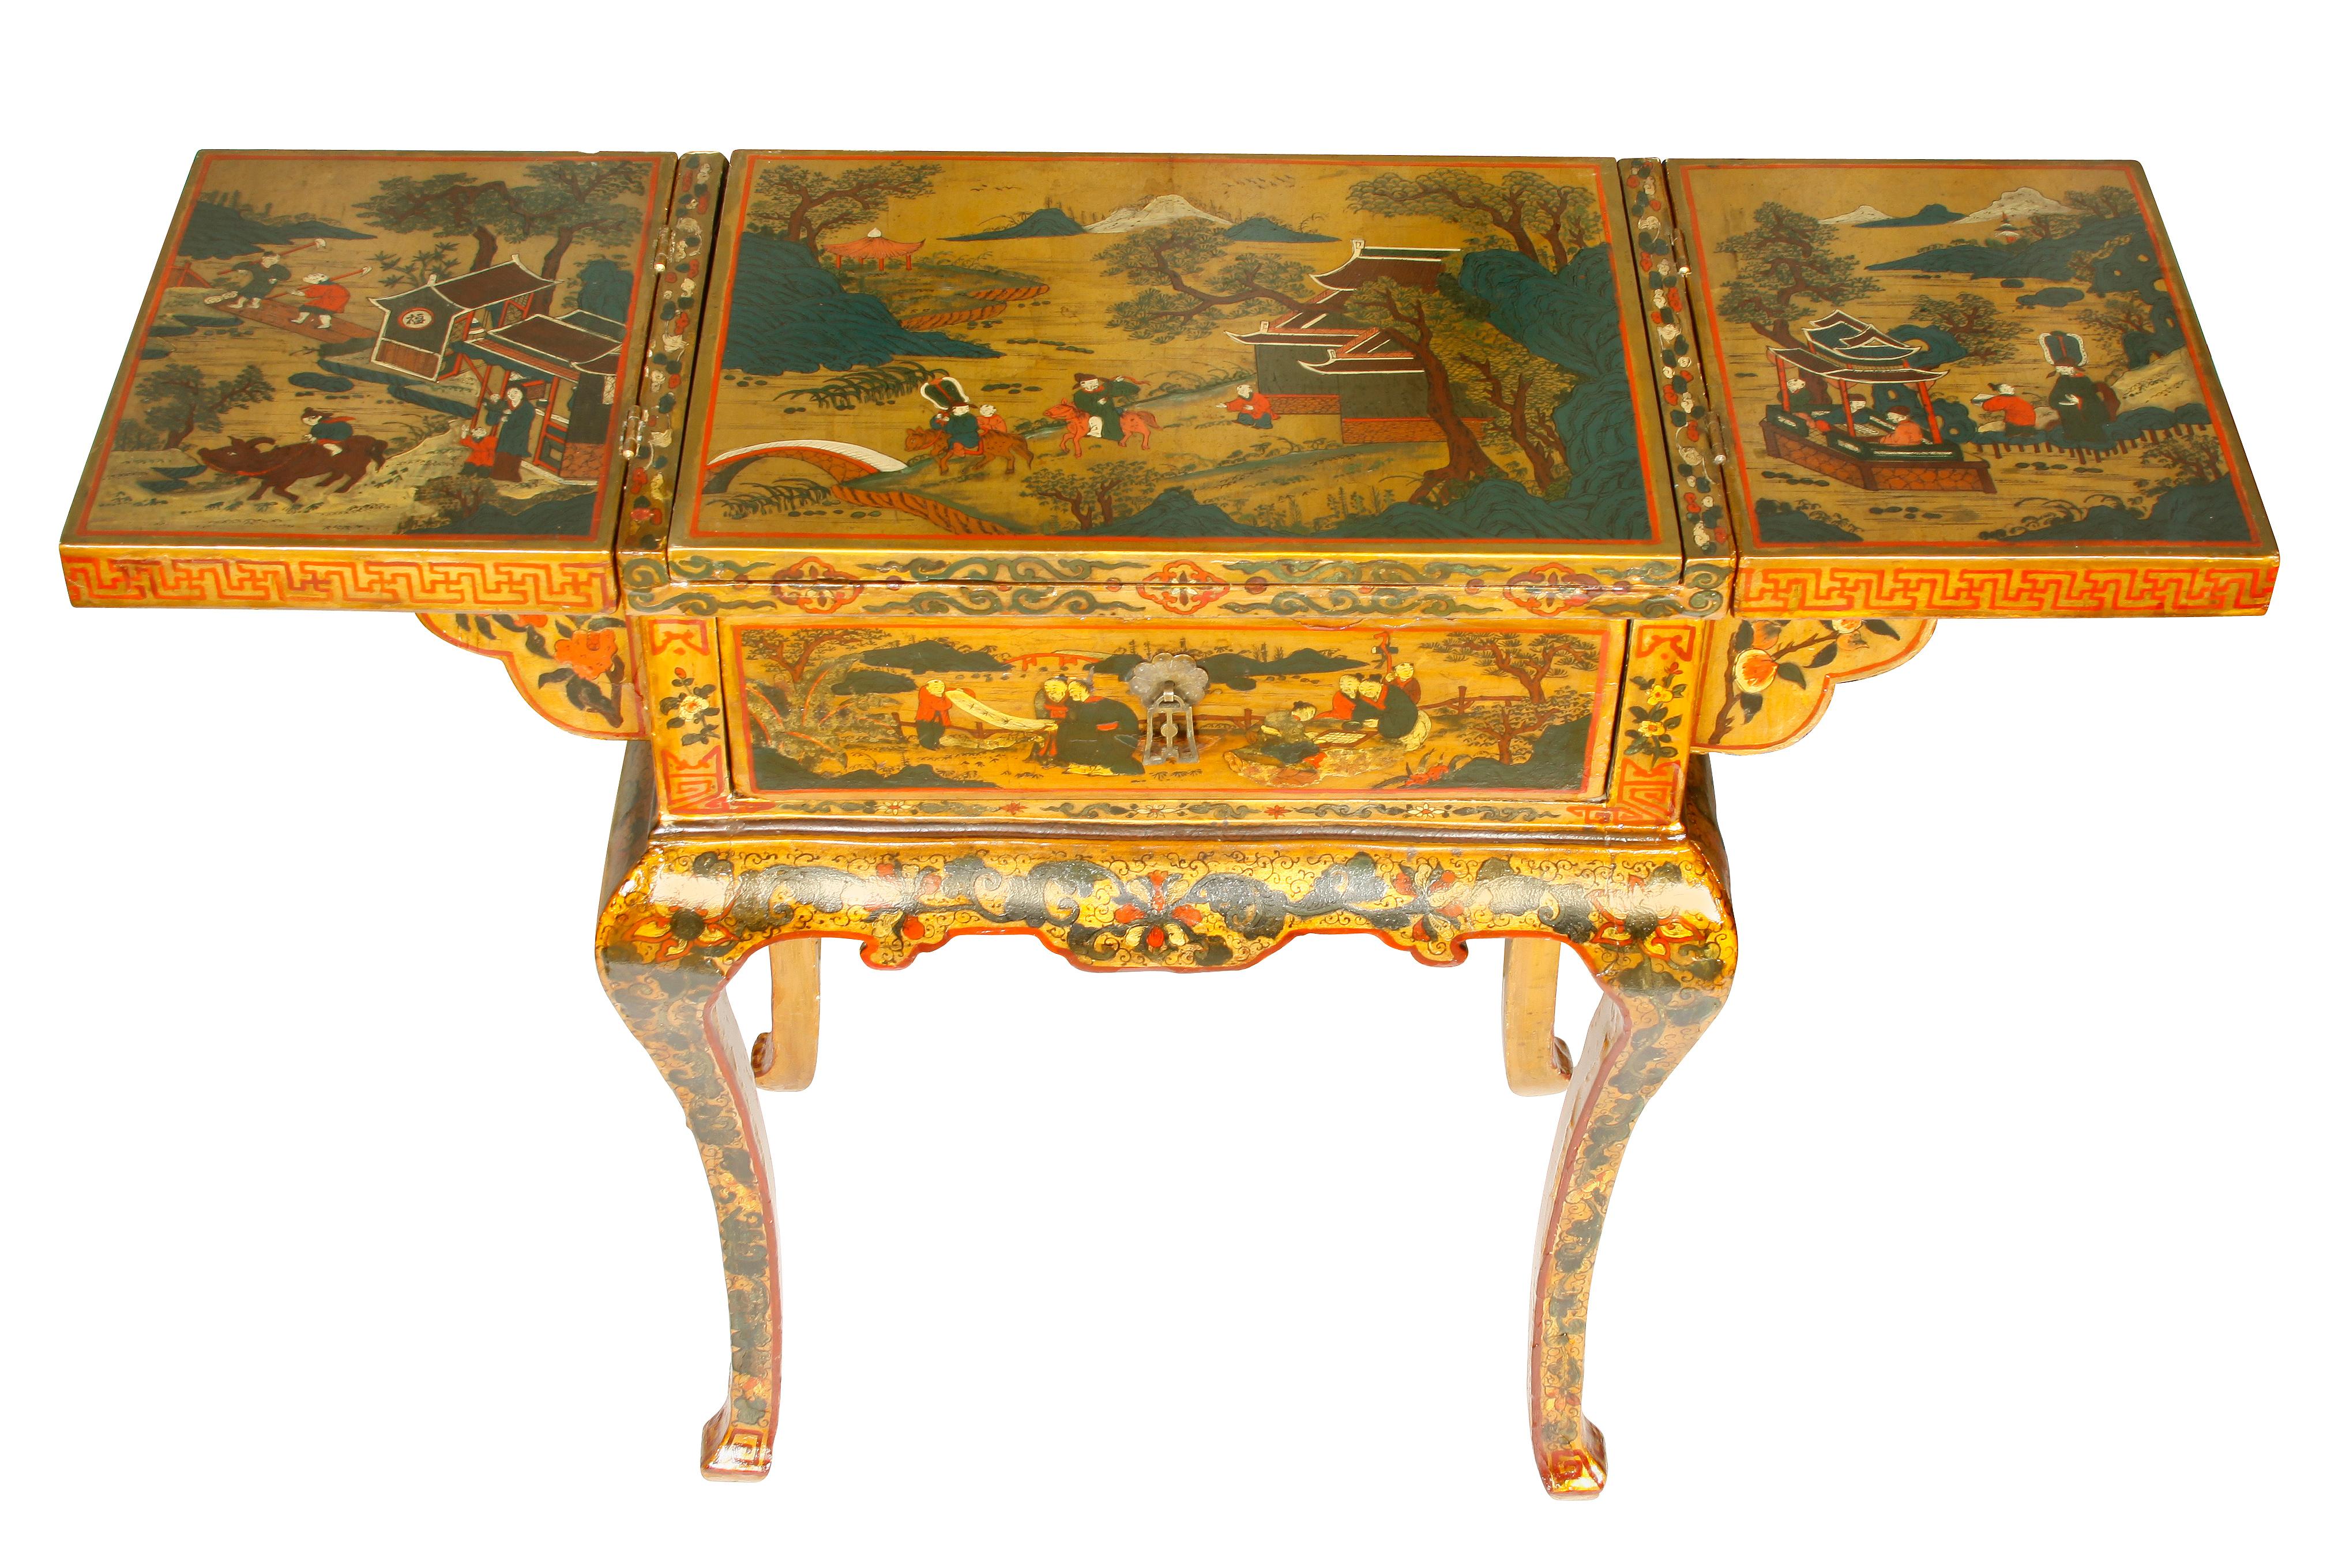 Antique chinoiserie dressing table with folding sides and hinged mirror. When closed measures 16.75